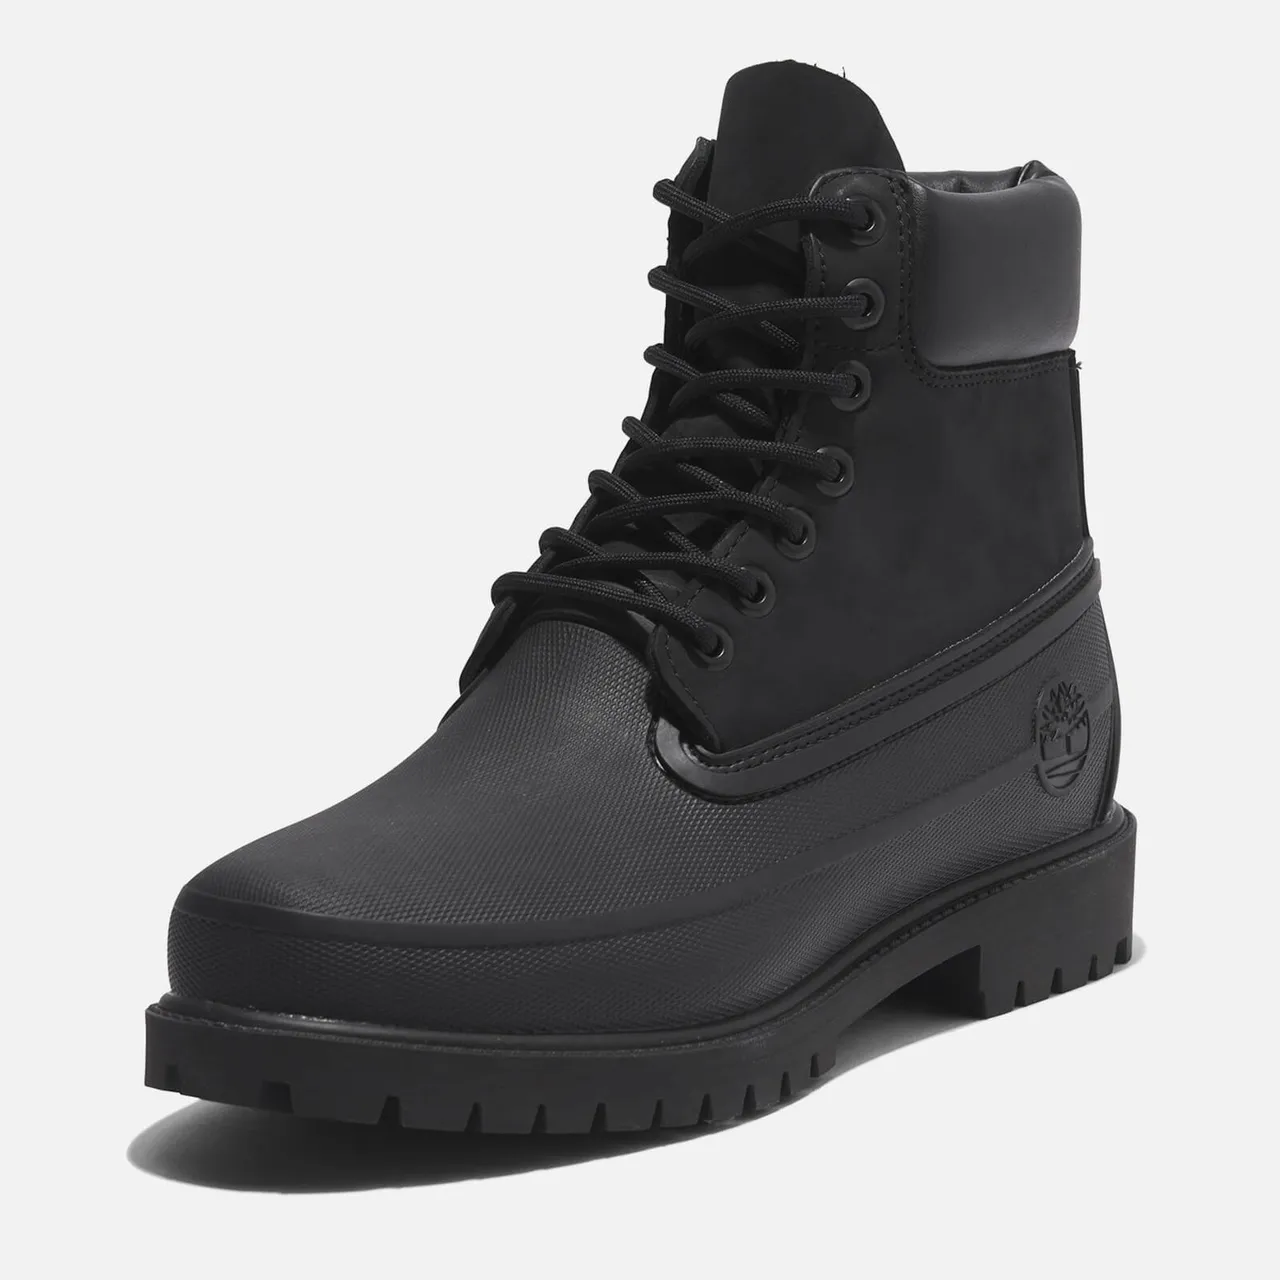 Timberland Men's Nubuck and Leather Ankle Boots